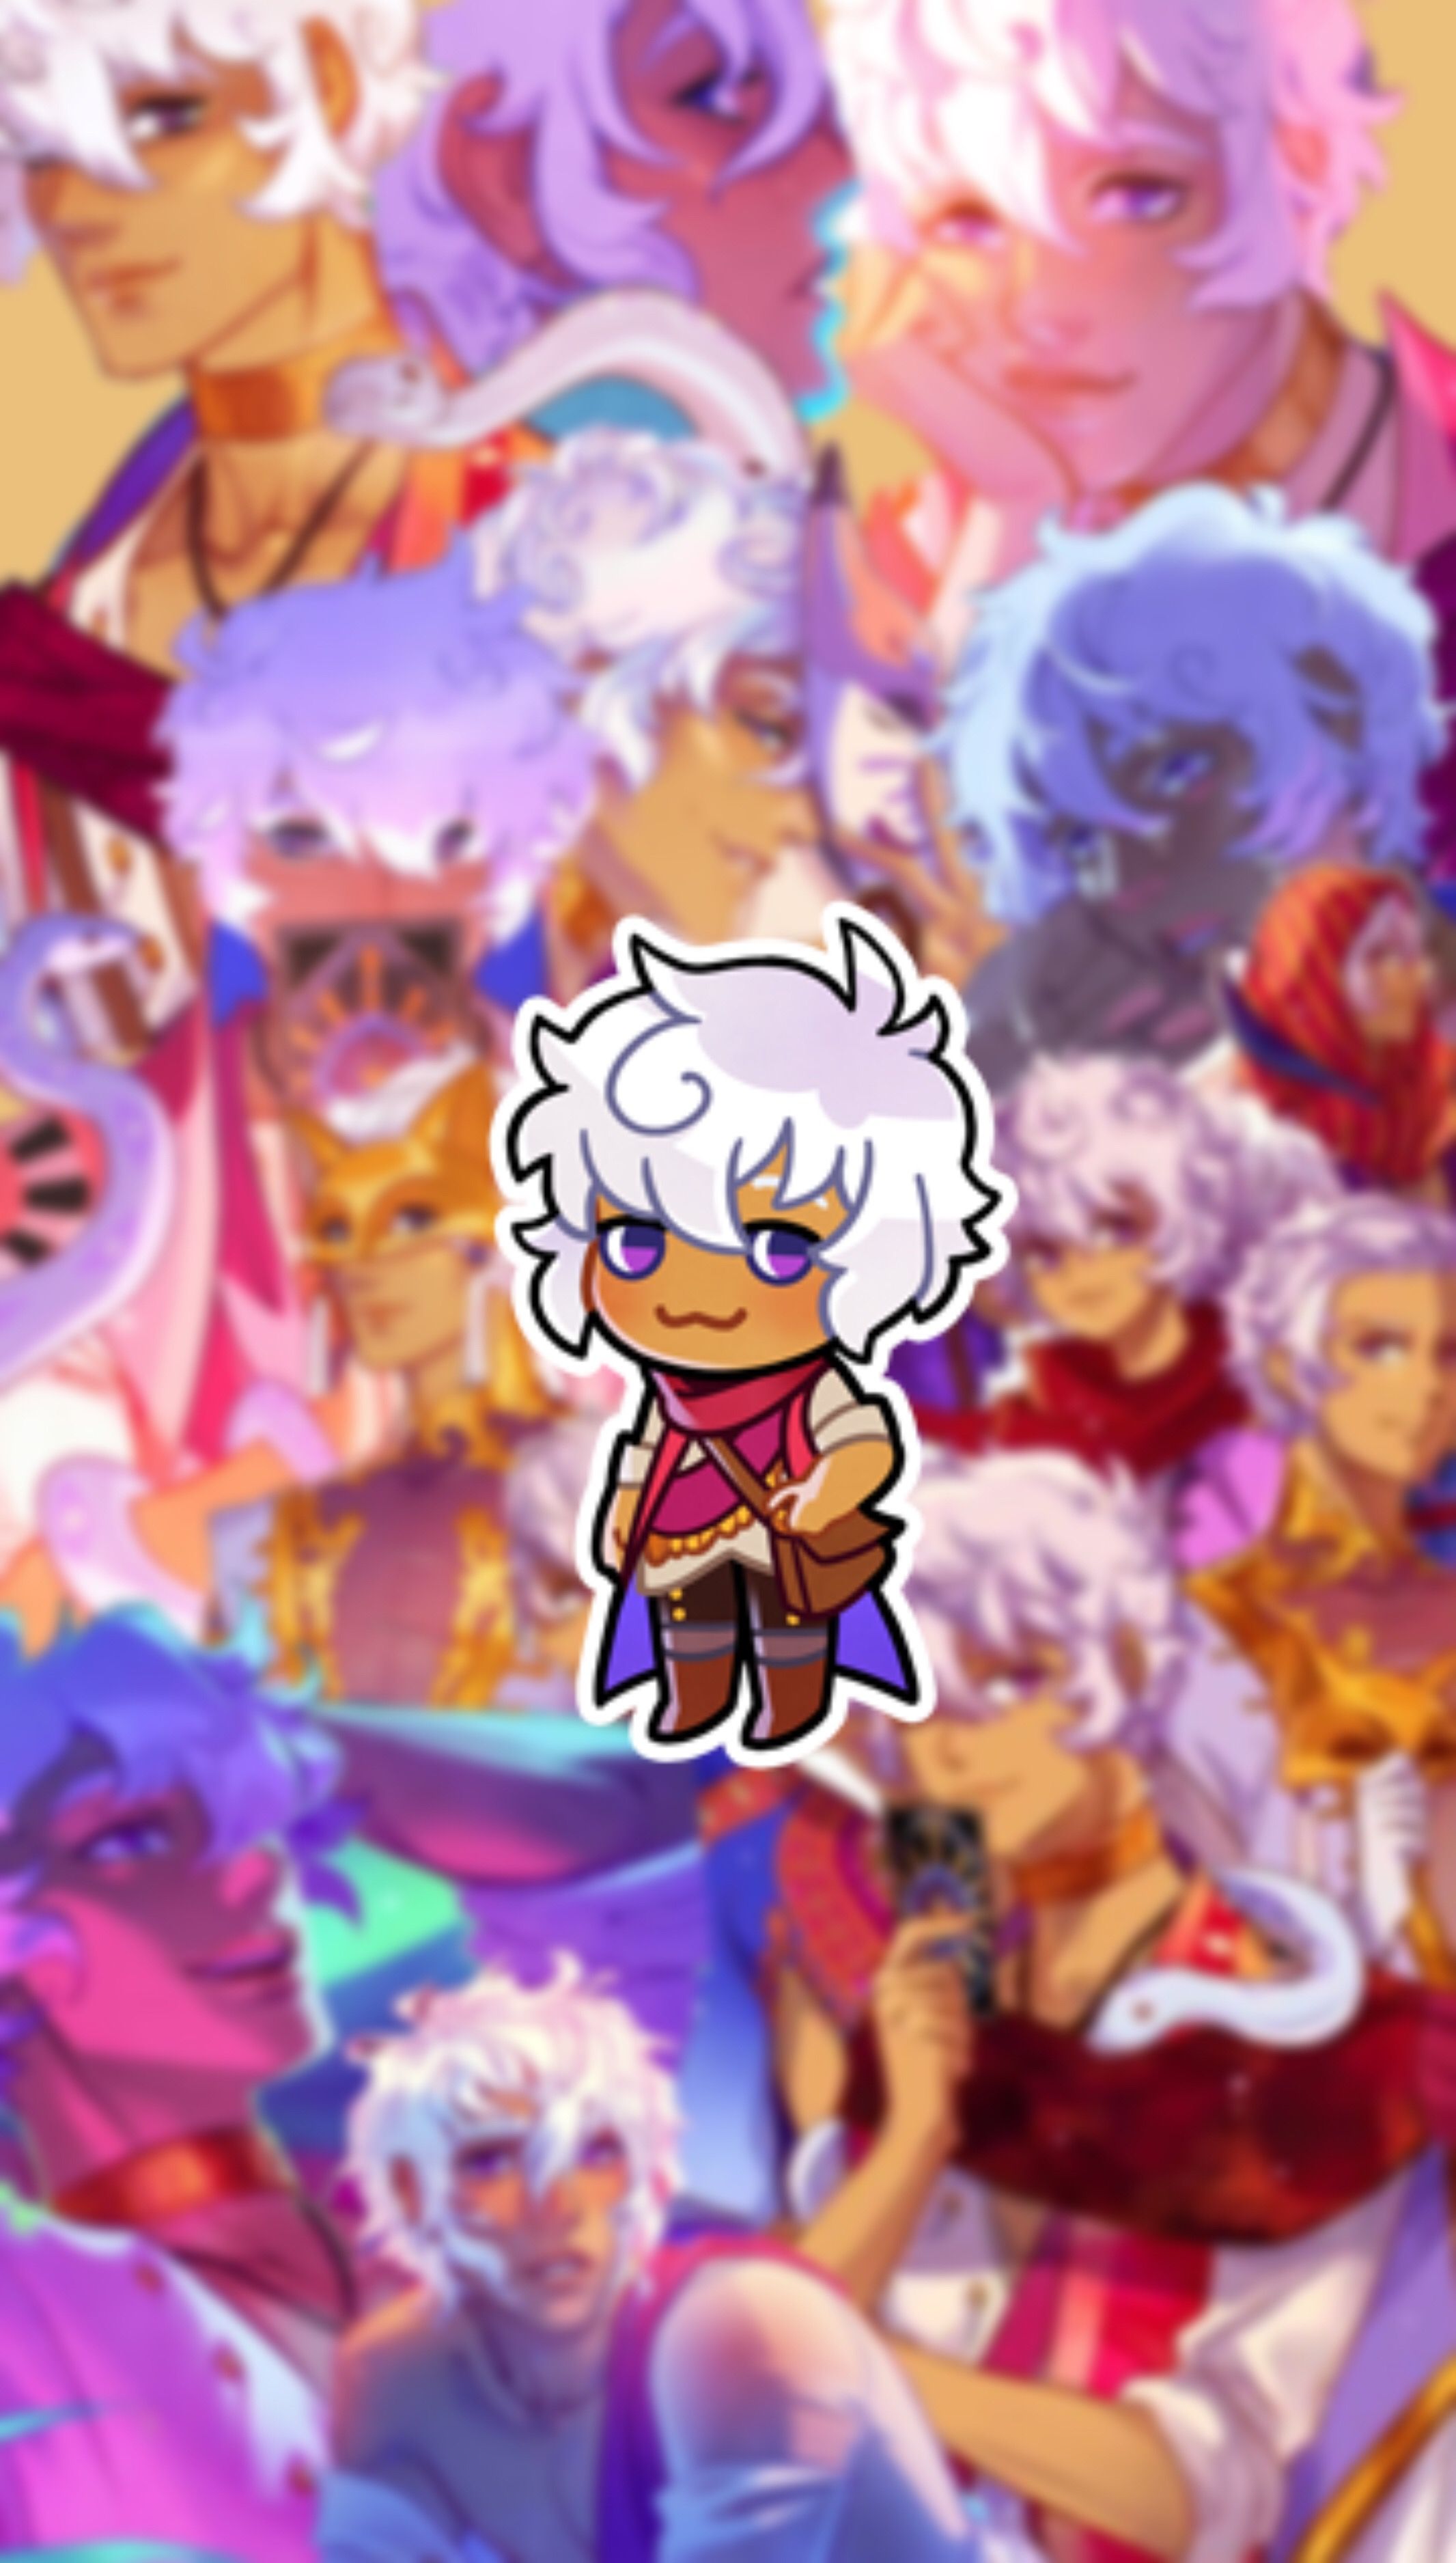 asra asrathemagician Image by rychee ♡